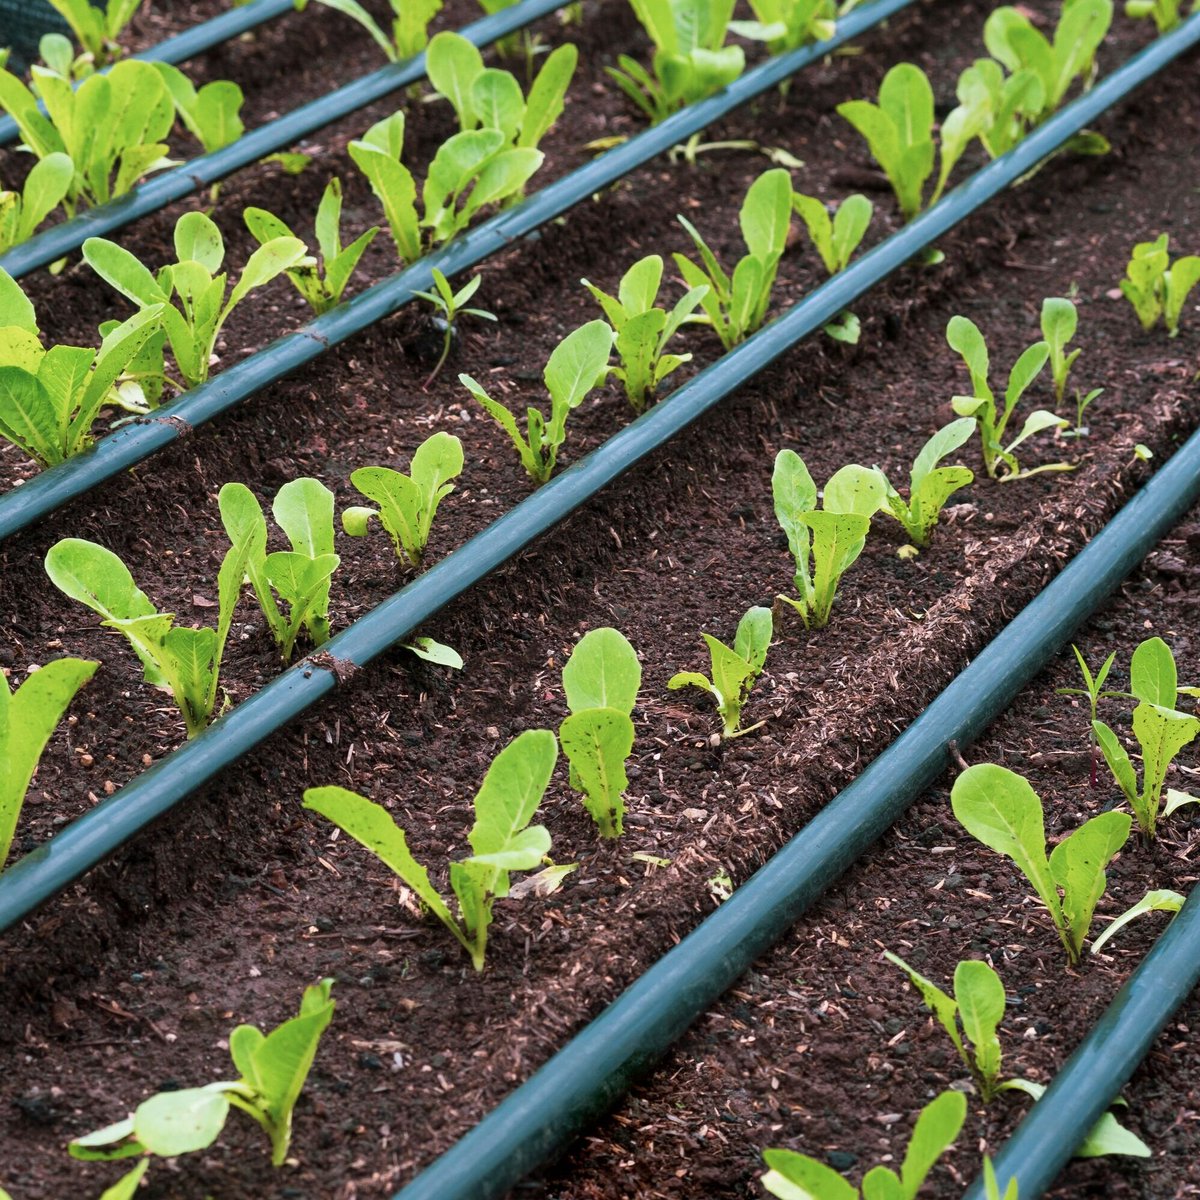 Consider using drip irrigation to save water and ensure that your plants get the right amount of water without overwatering. #DripIrrigation #WaterEfficiency